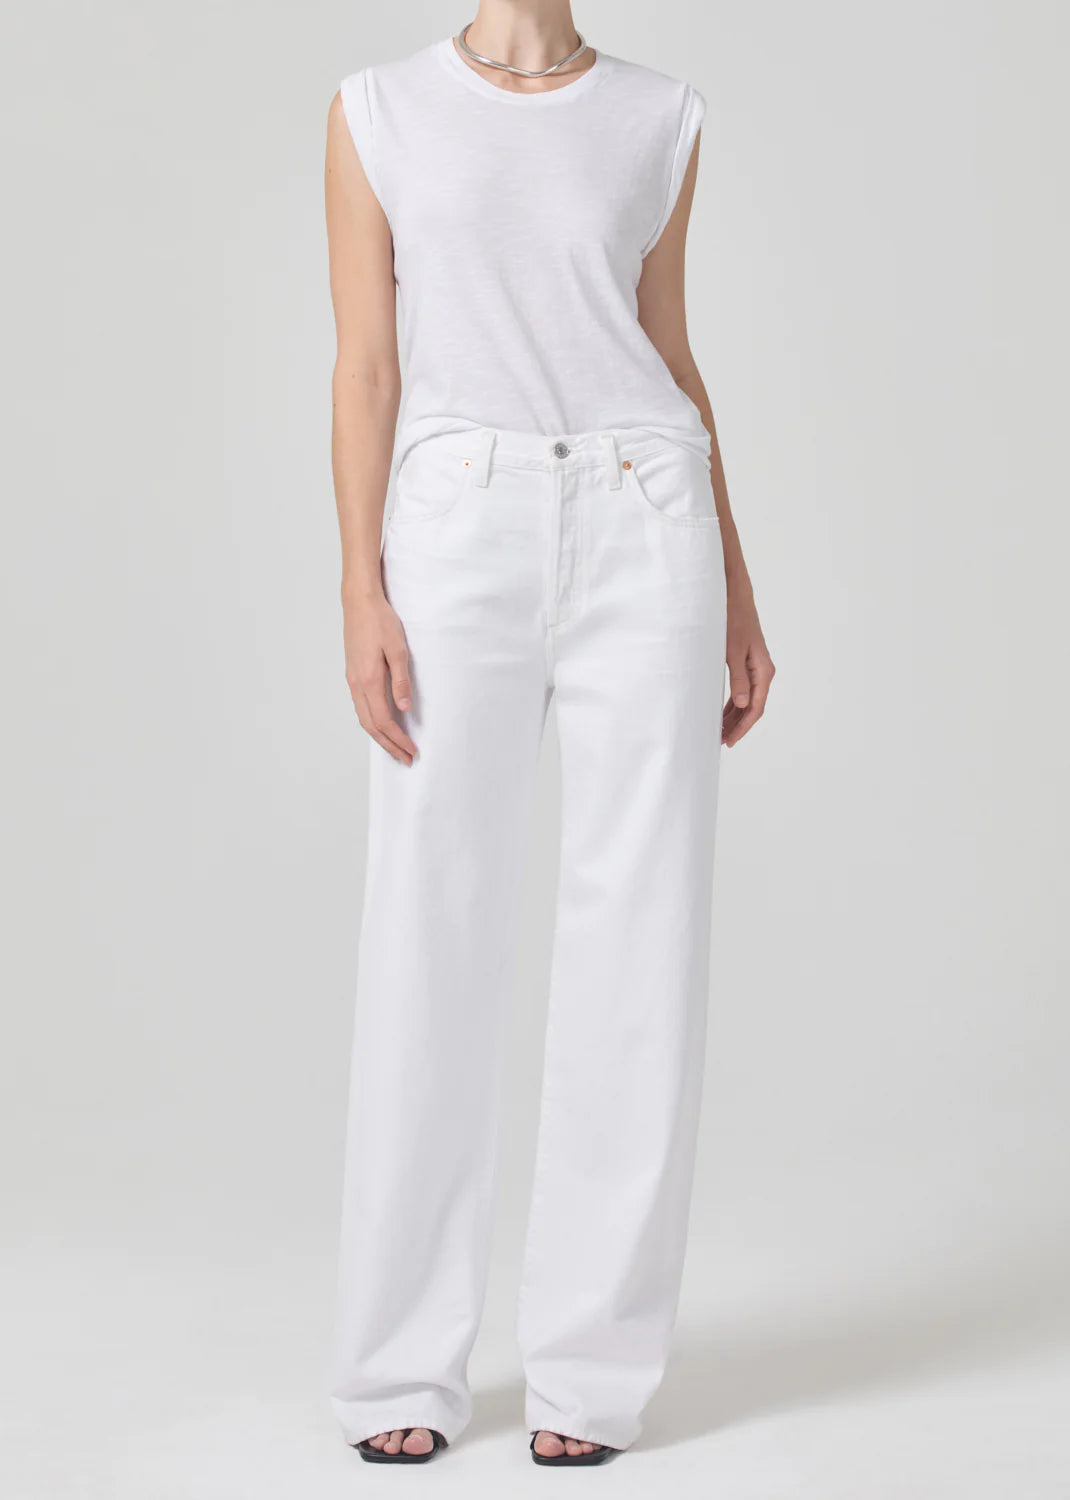 CITIZENS OF HUMANITY Annina Long Trouser Jean